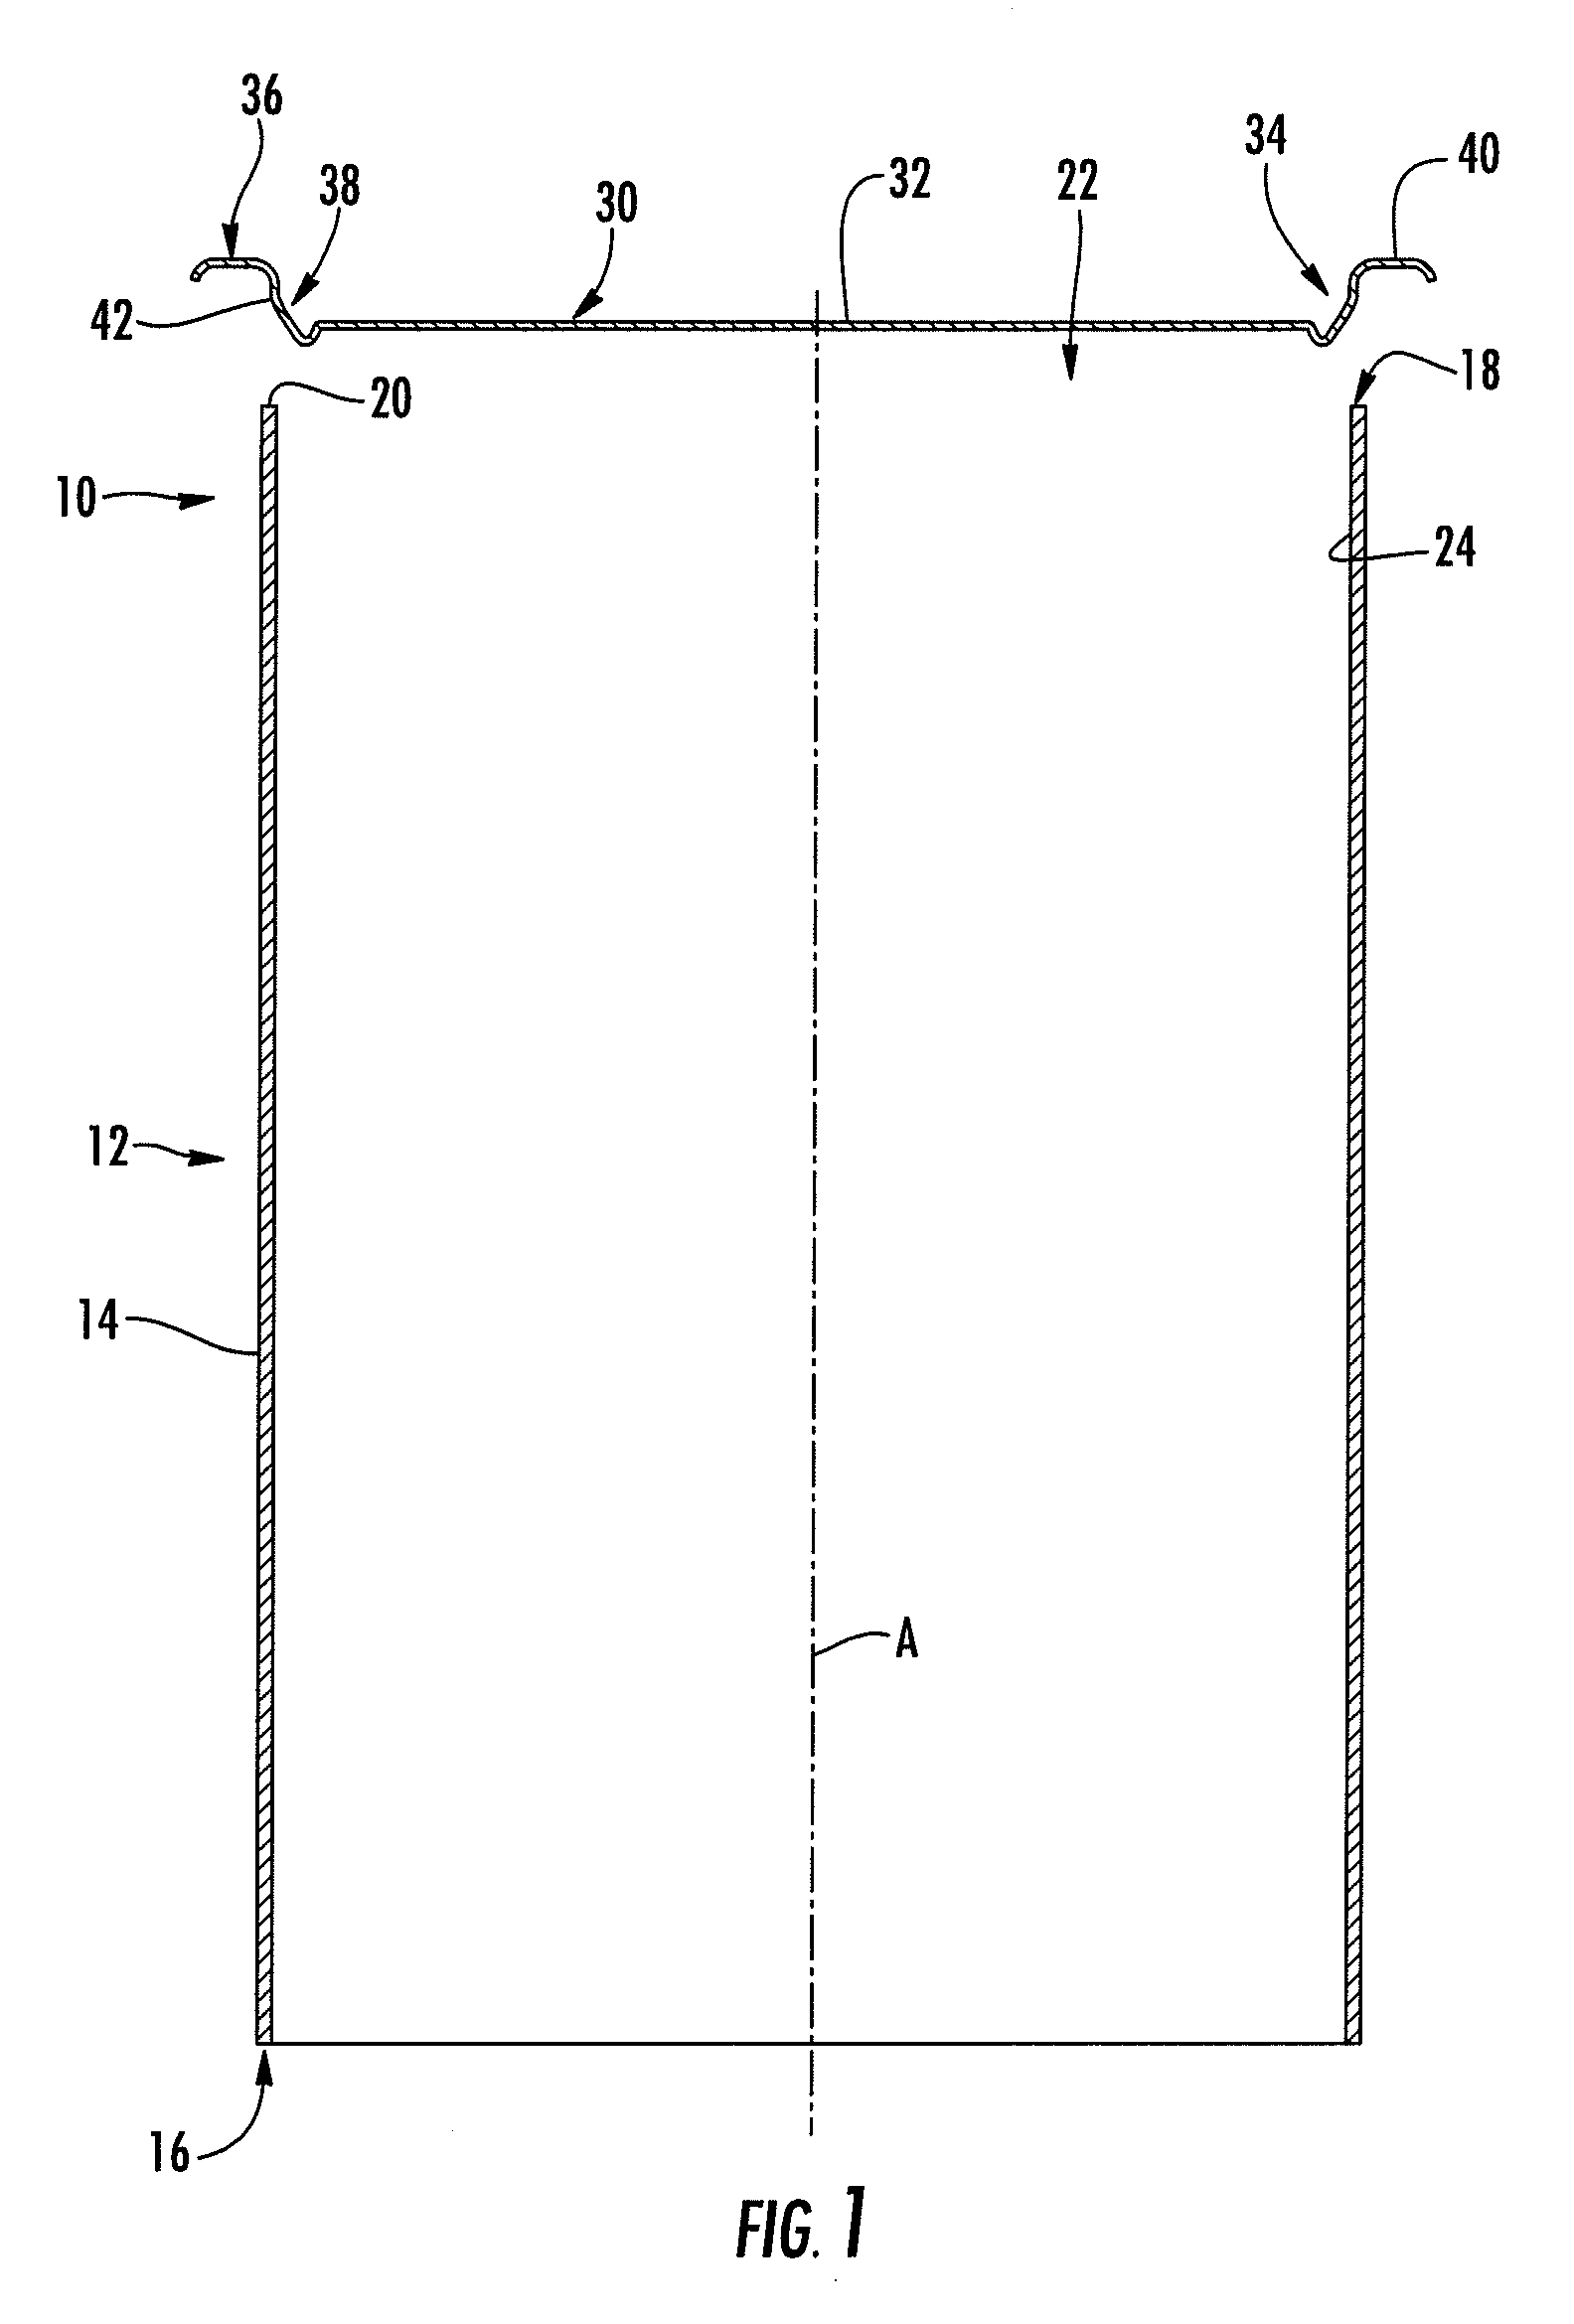 Method for Applying a Metal End to a Container Body